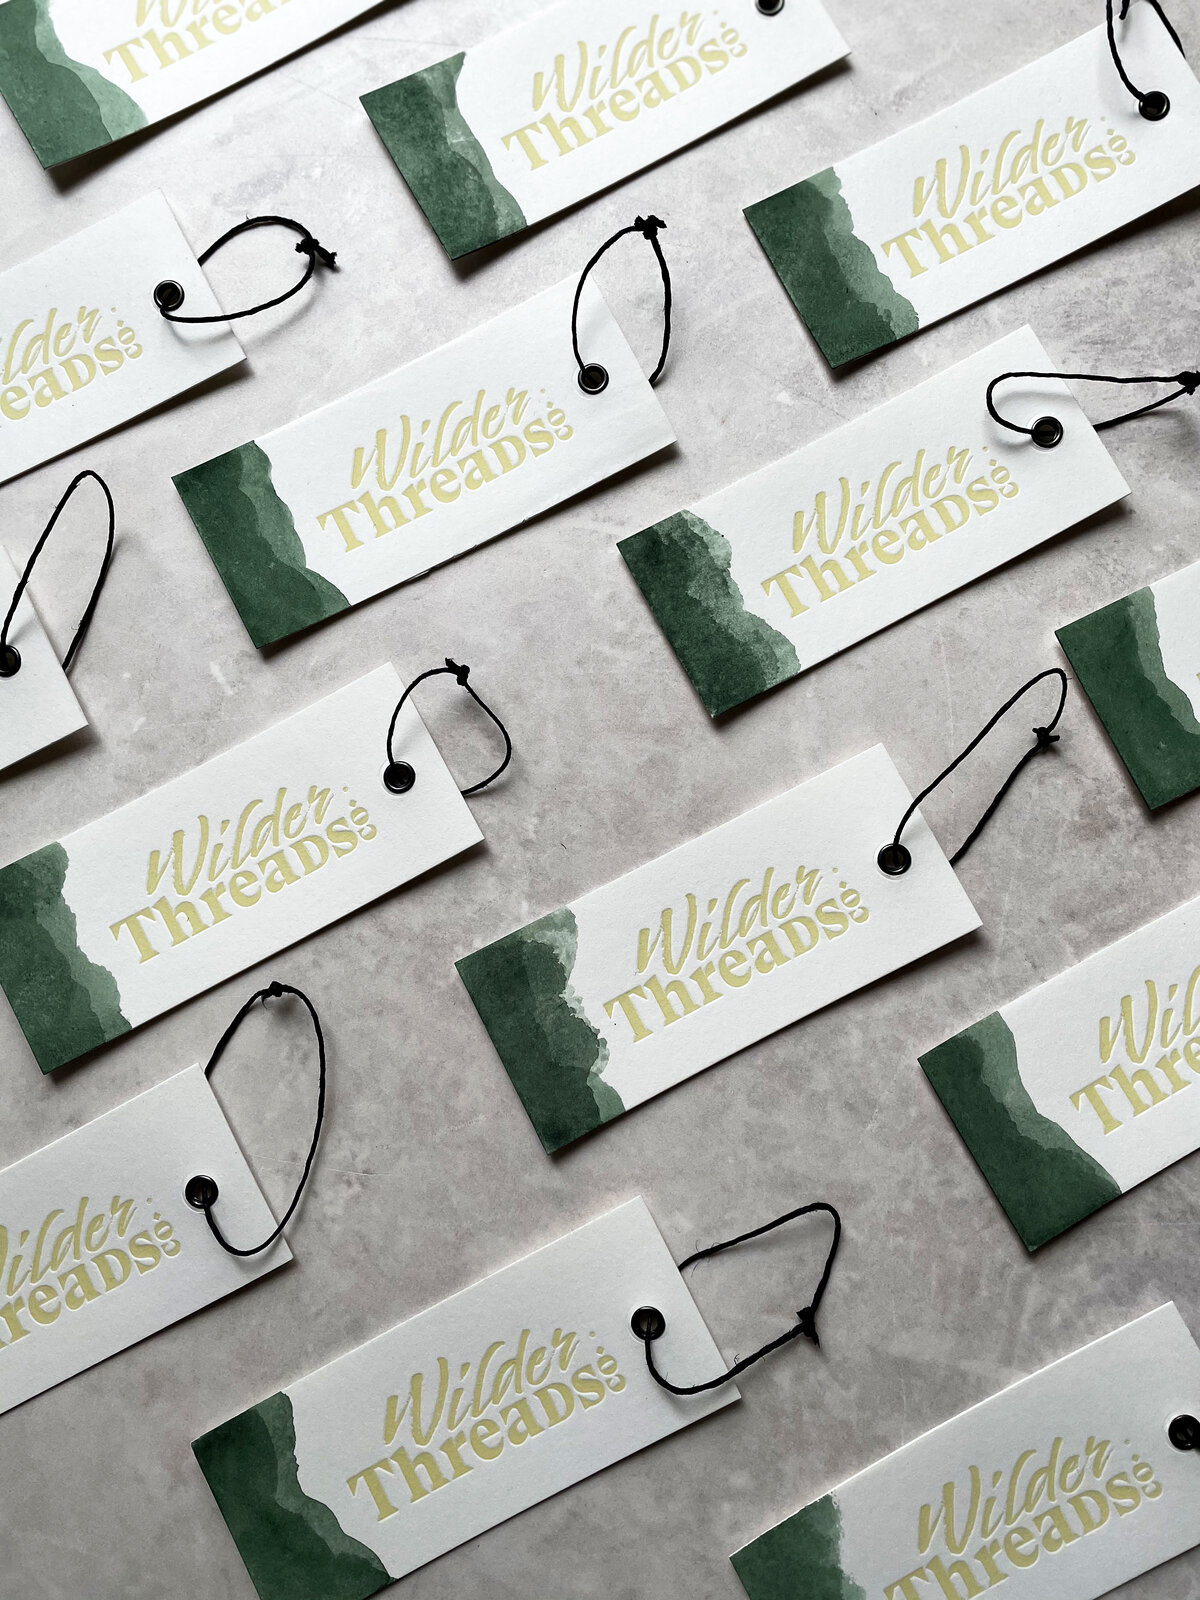 letterpress clothing tags in green for wilderthreads